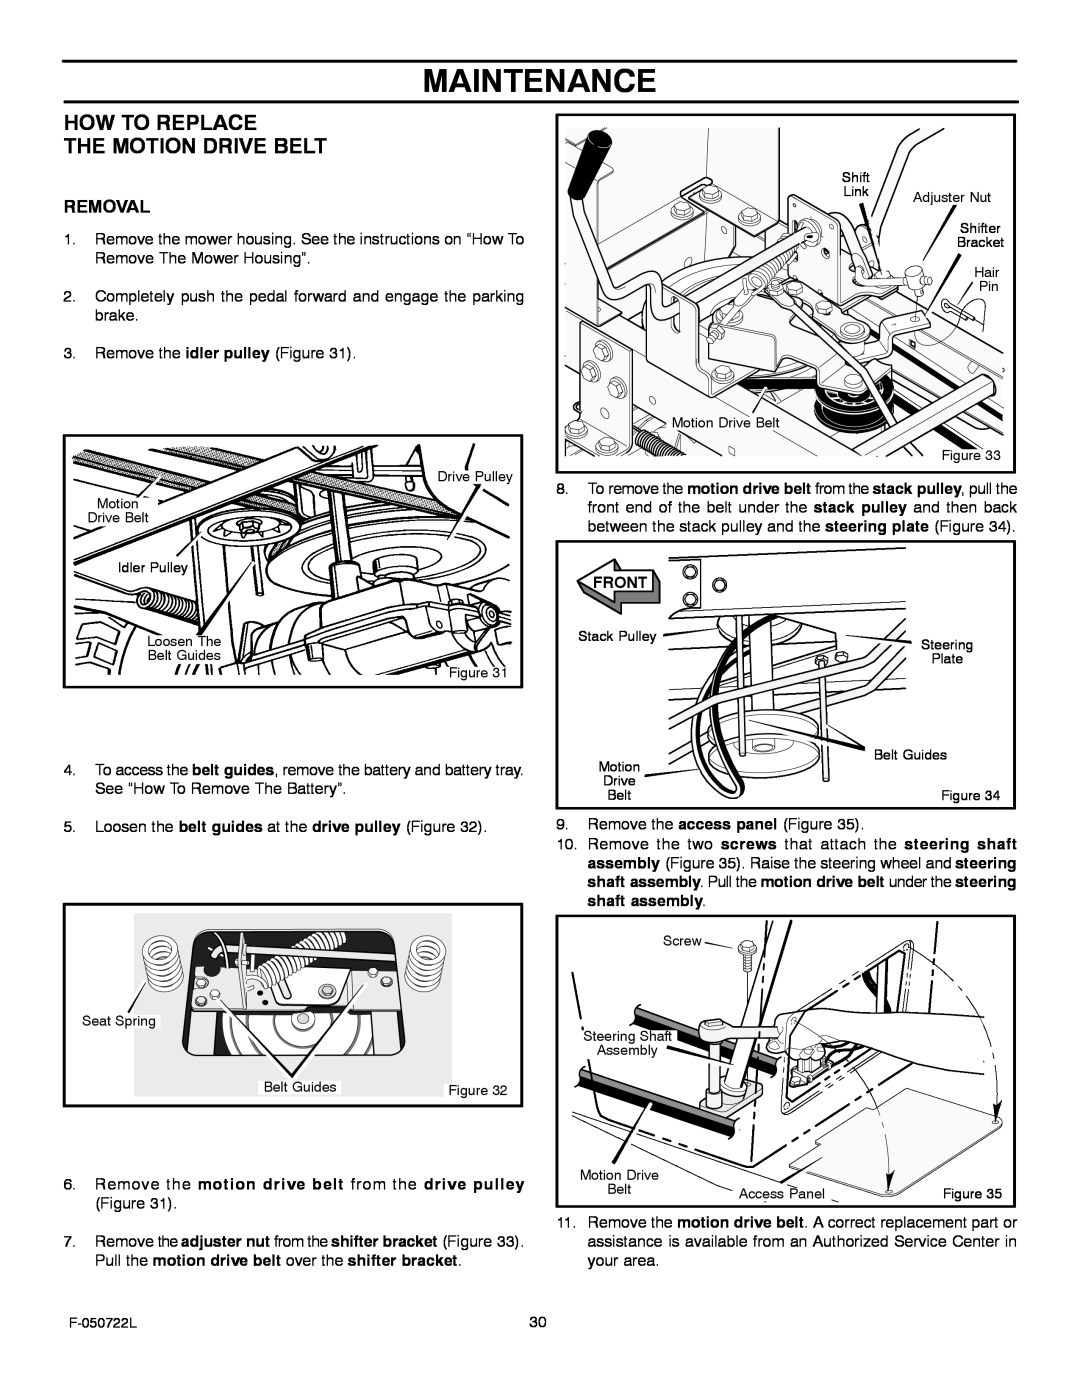 Murray 425001x99A manual Maintenance, How To Replace The Motion Drive Belt, Removal 